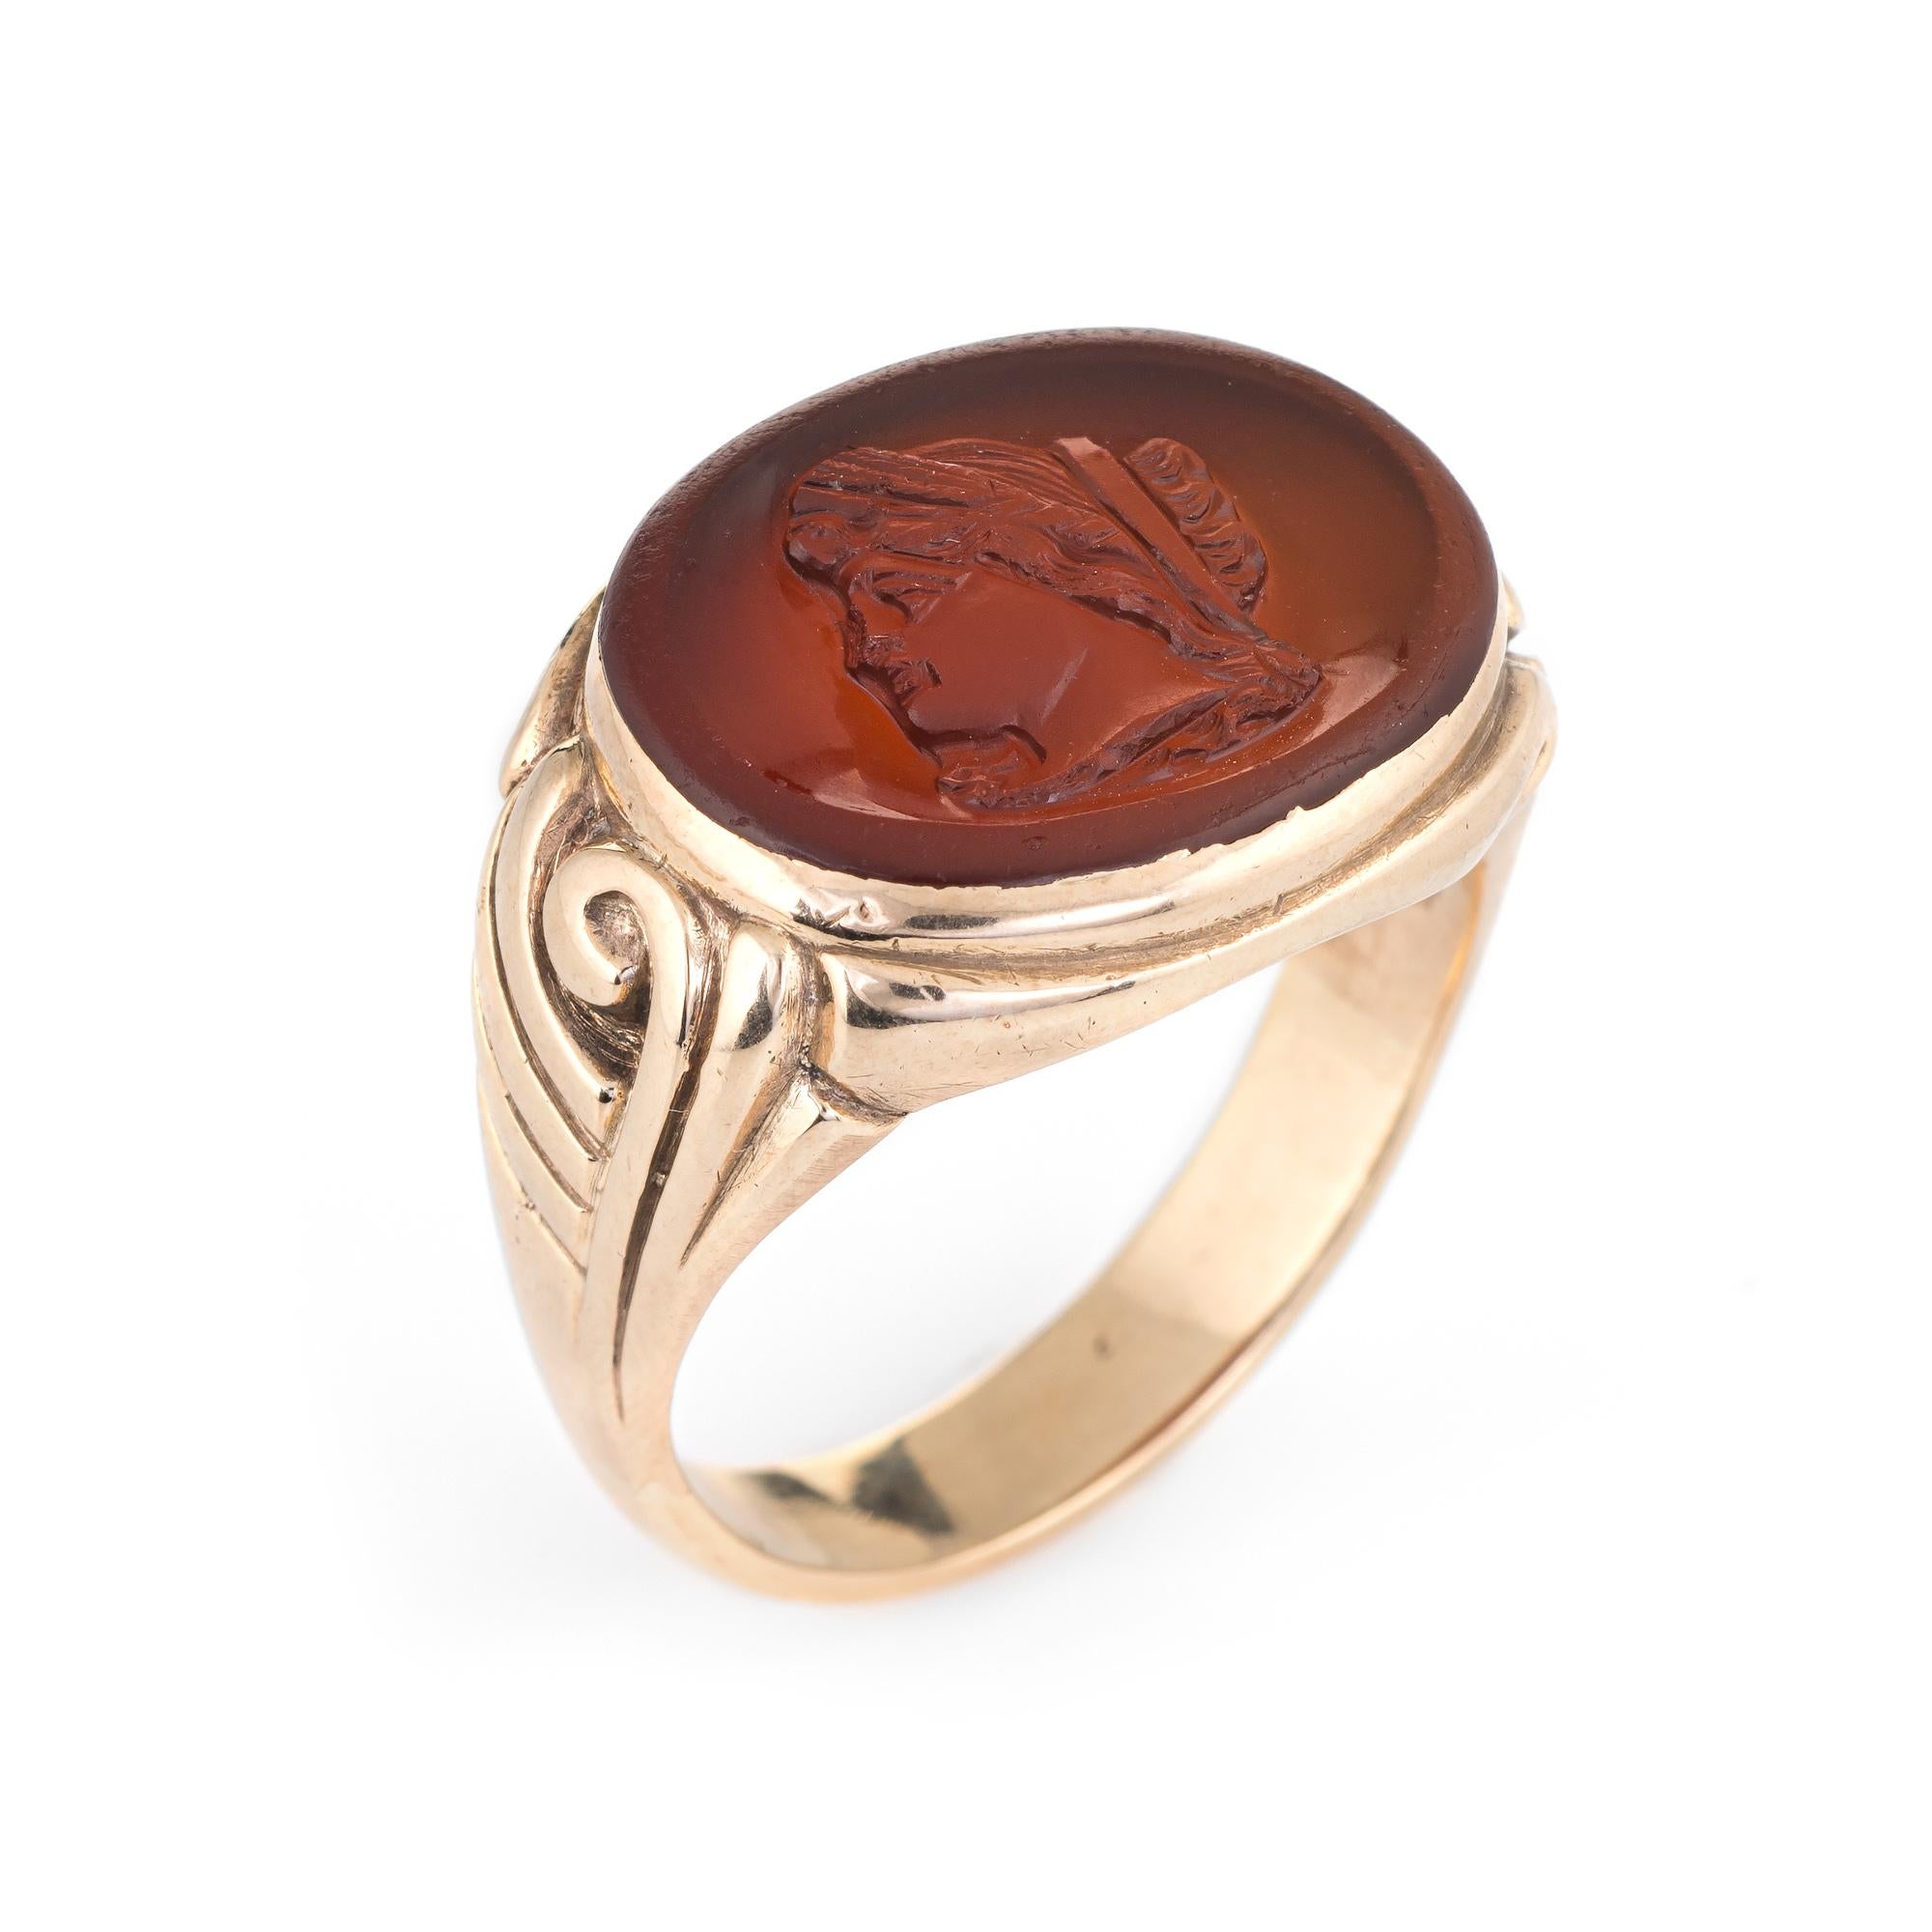 Finely detailed carnelian intaglio ring (circa 1940s to 1950s) crafted in 14 karat yellow gold. 

Carnelian measures 20mm x 16mm. The carnelian is in excellent condition and free of cracks or chips. 

The carnelian is set in an east-west profile. A